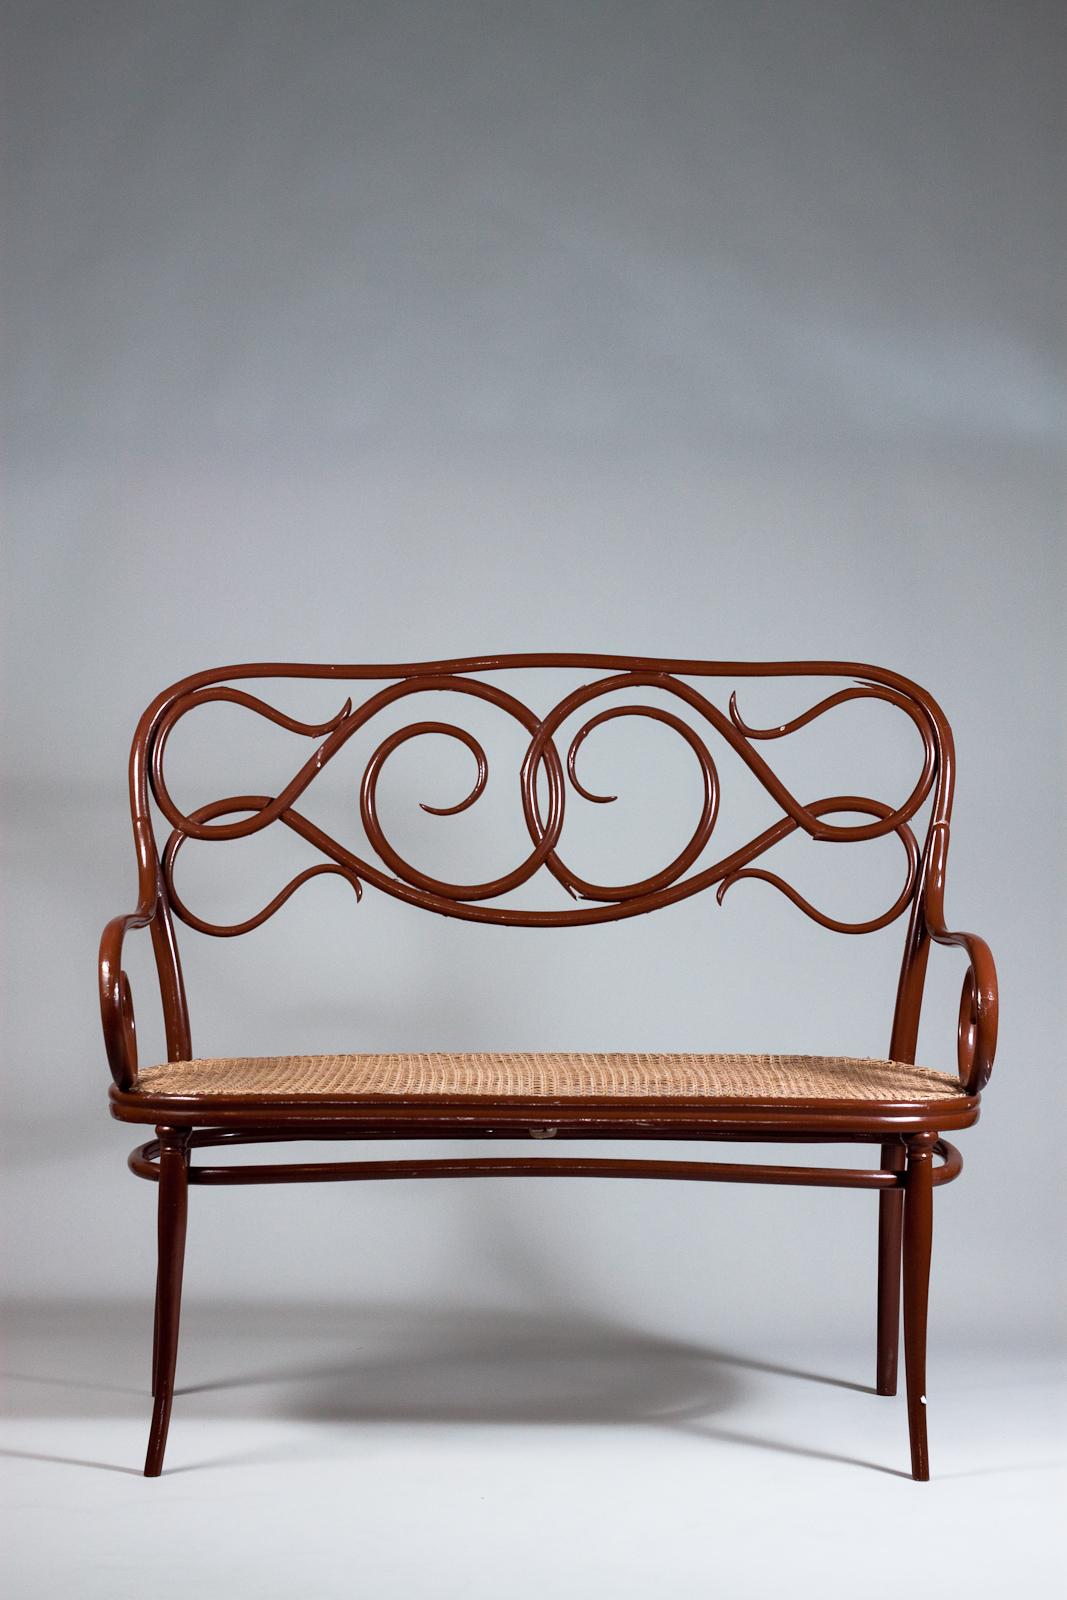 Painted Antique Thonet No. 2 Bentwood Sofa , late 19th century For Sale